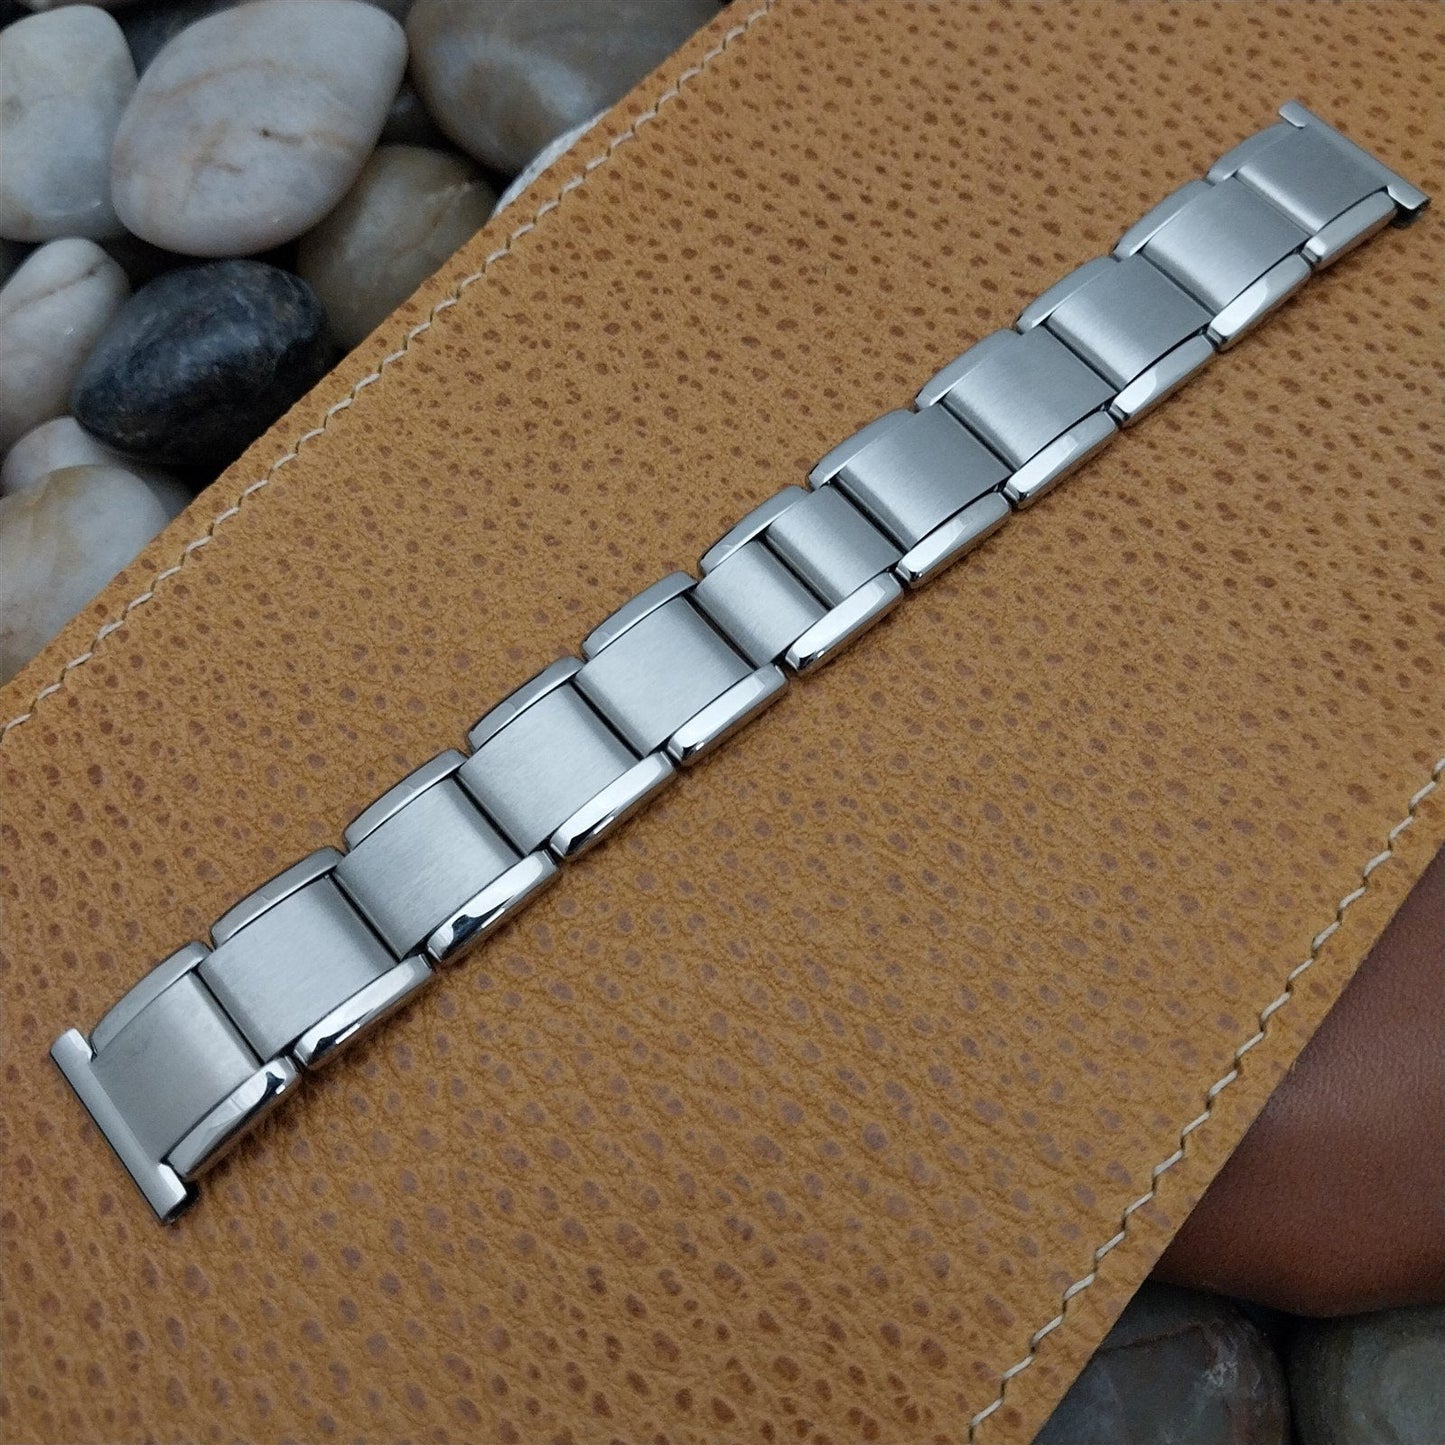 18mm Kiefer Expandro Stainless Steel Wire Lug Unused 1960s Vintage Watch Band